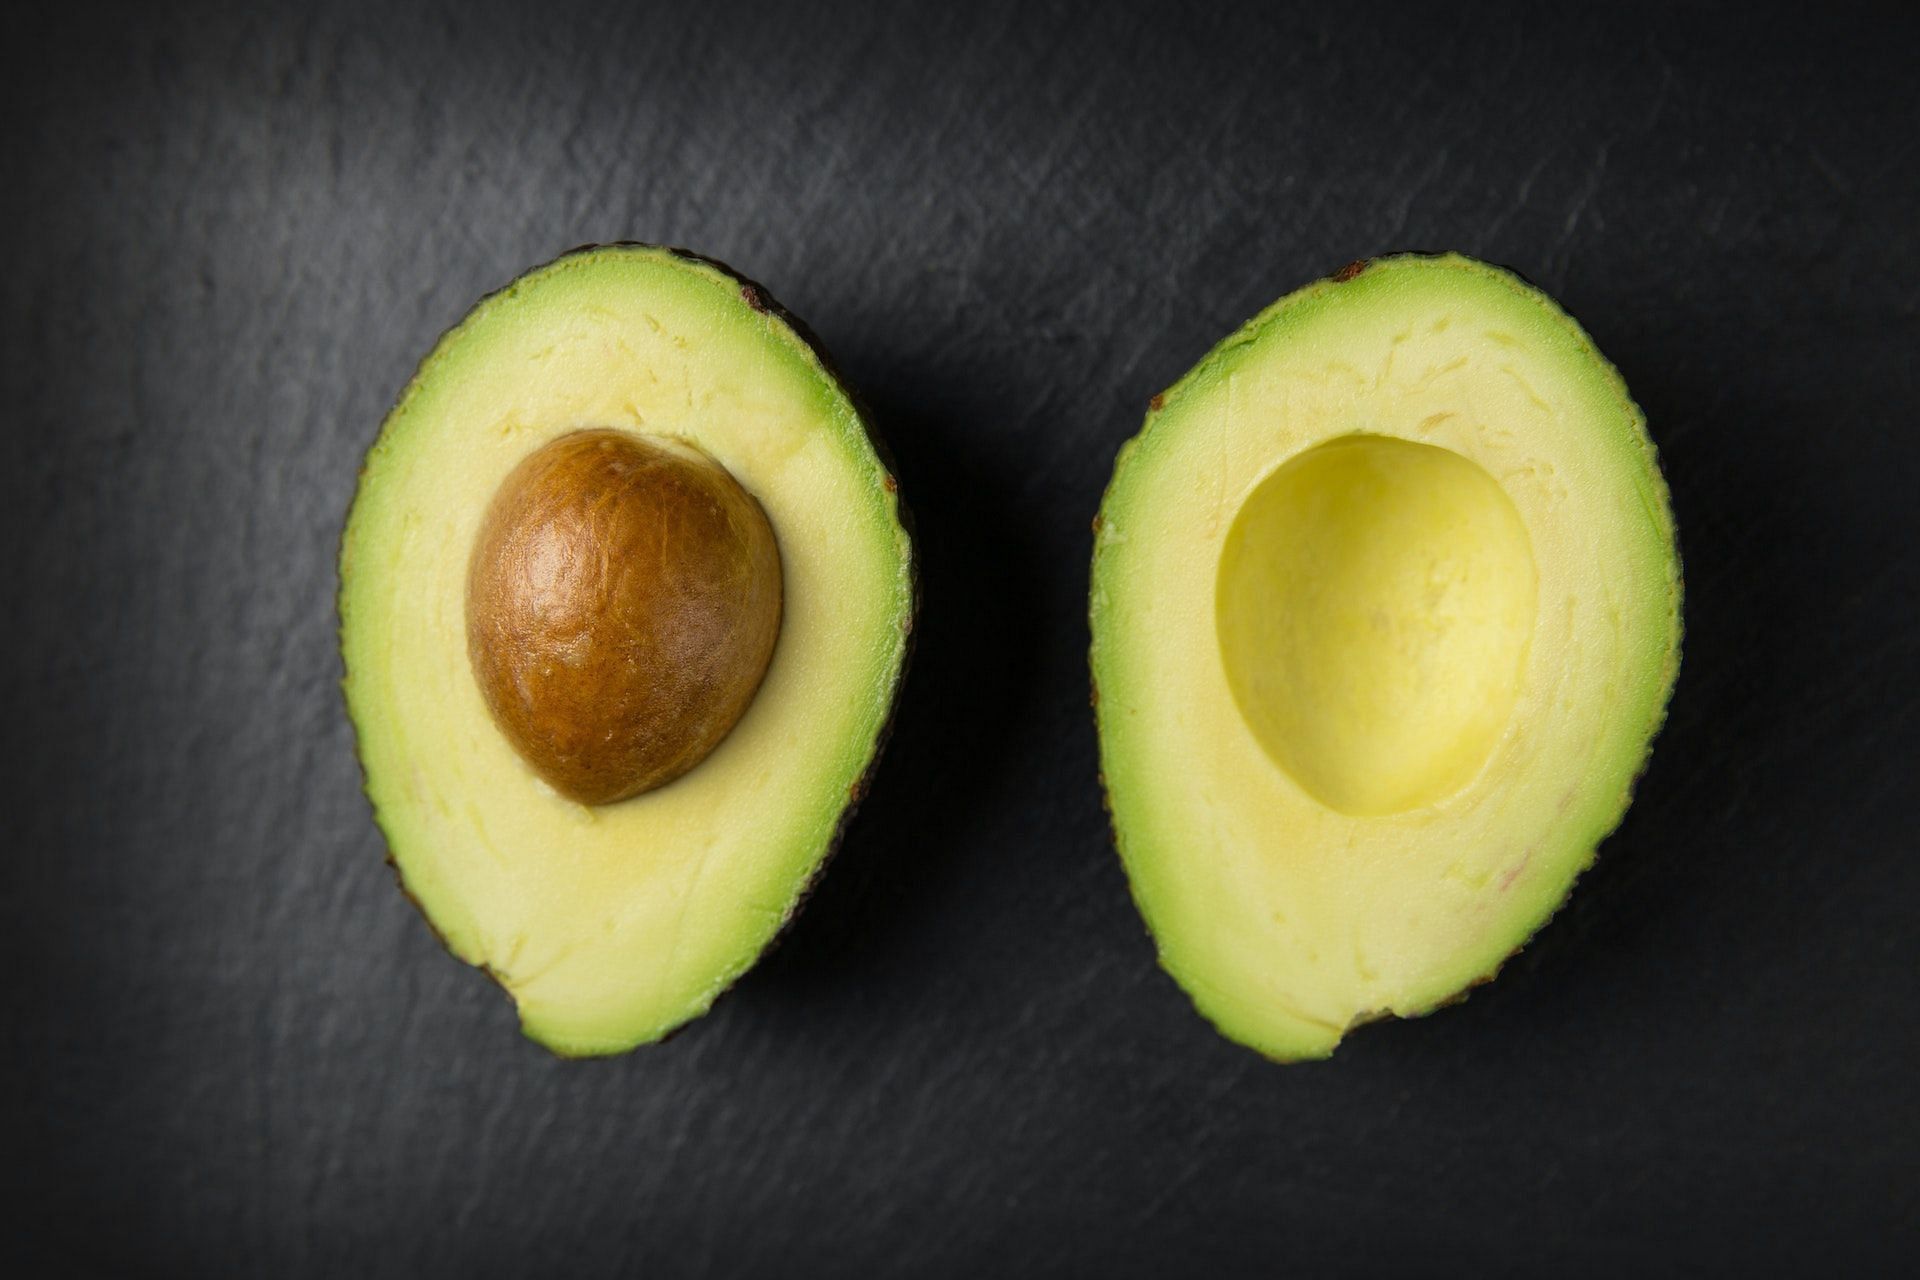 Avocados are a source of vitamins C and E. (Image via Pexels/Foodie Factor)